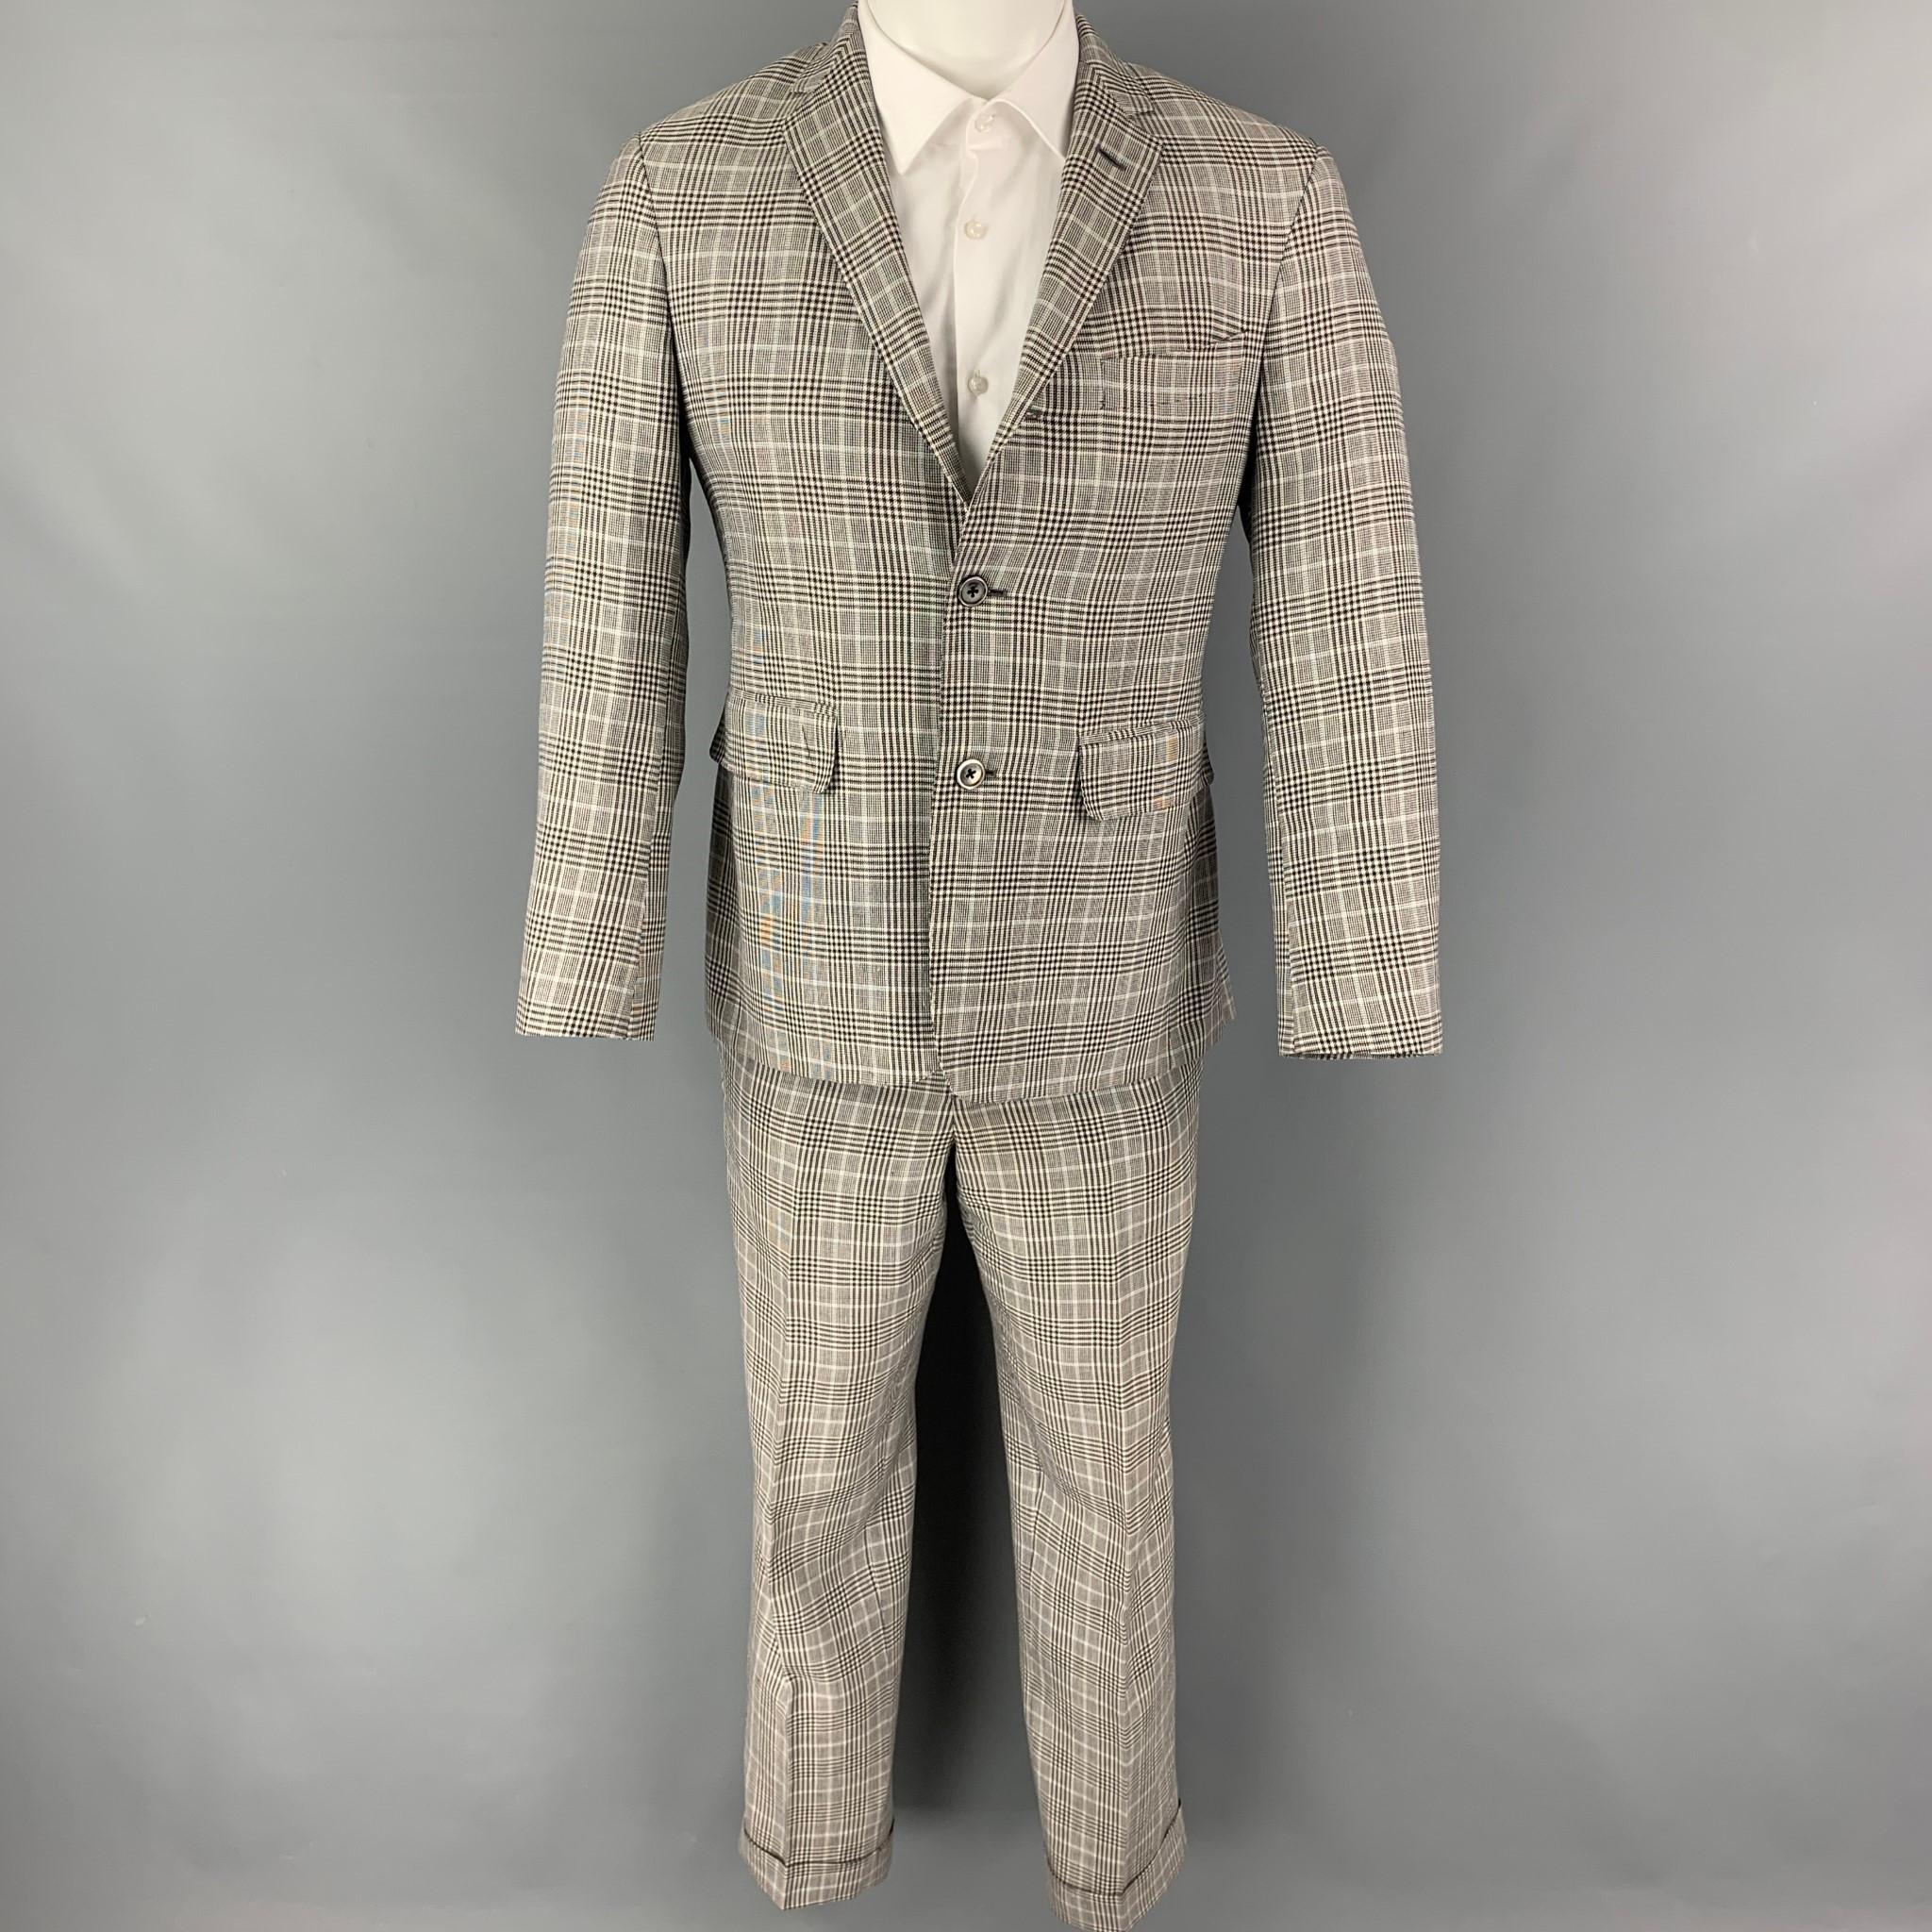 BLACK FLEECE suit comes in a black & white glenplaid wool blend with a full liner and includes a single breasted, three button sport coat with a notch lapel and matching flat front trousers.

Very Good Pre-Owned Condition.
Marked: